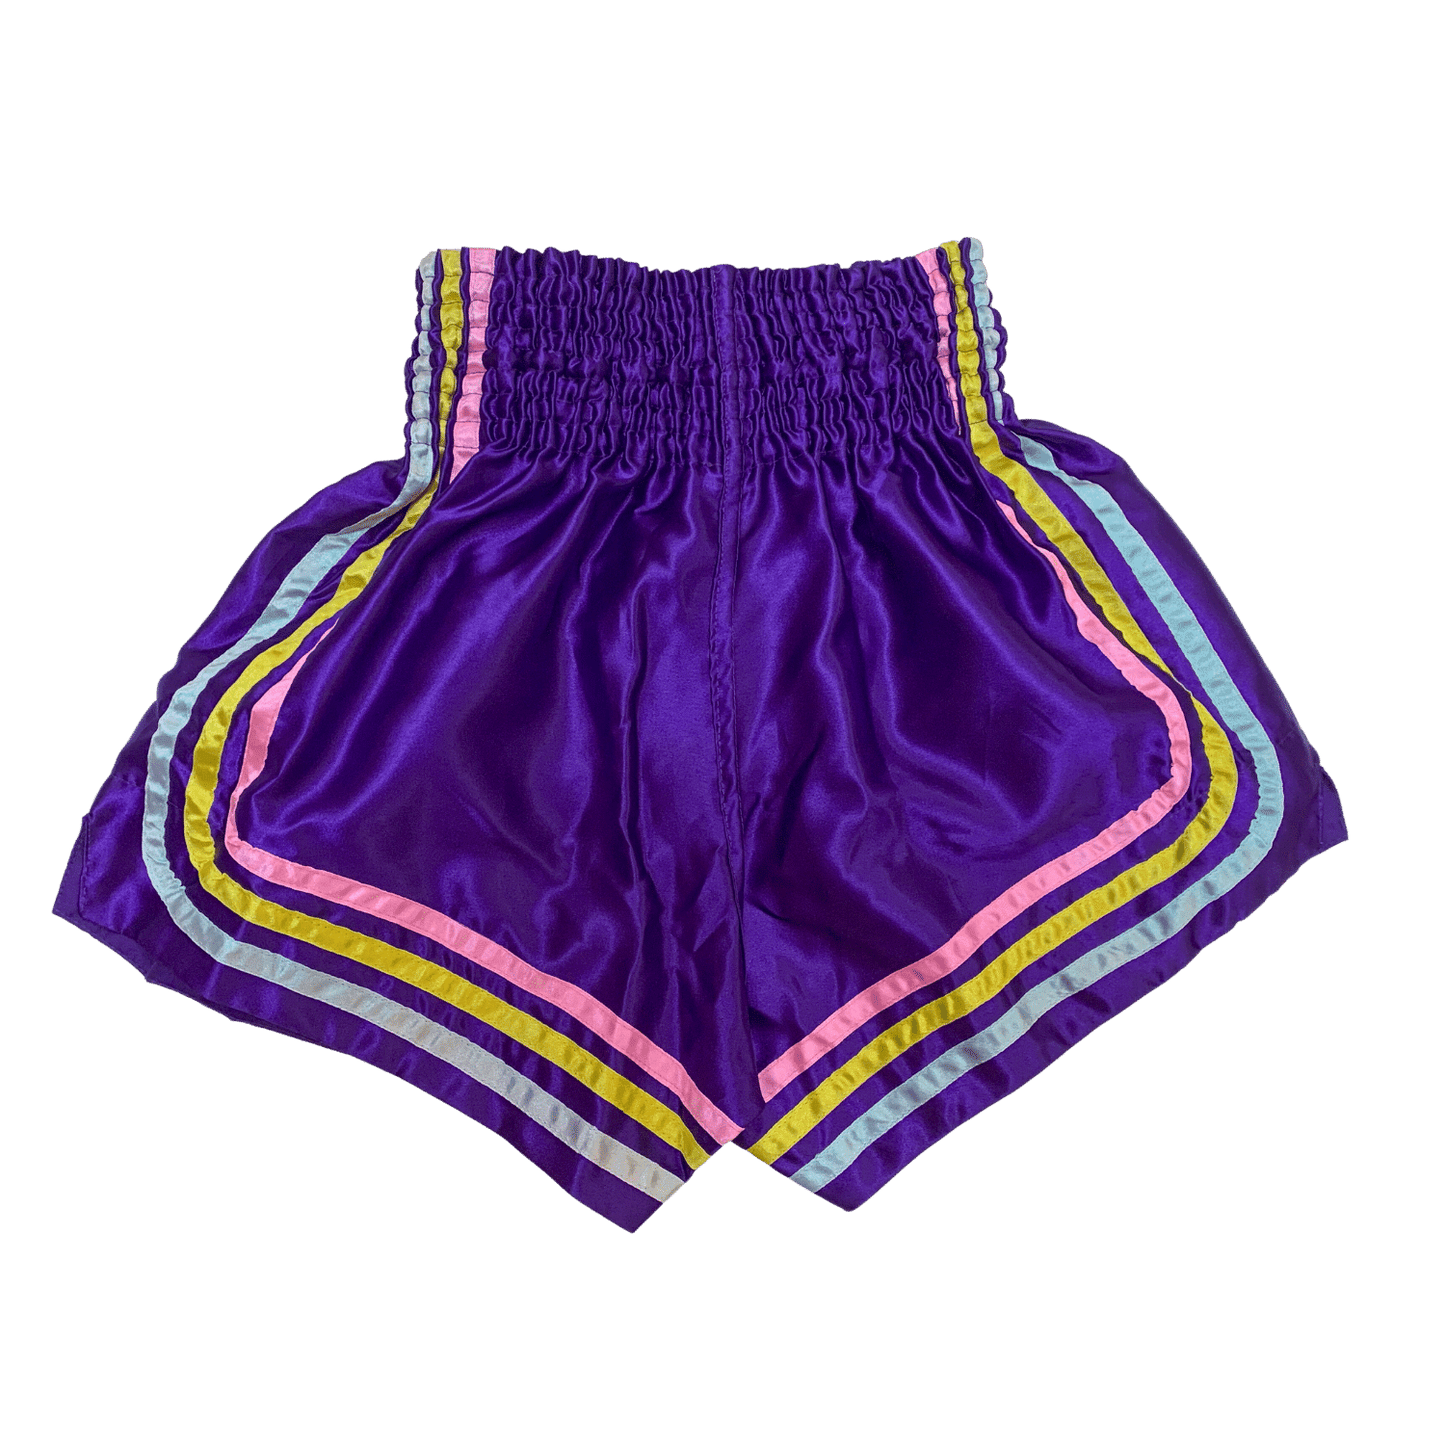 Hanuthai Royal Stride Muay Thai Boxing Shorts with rainbow stripes and authentic Thai design.